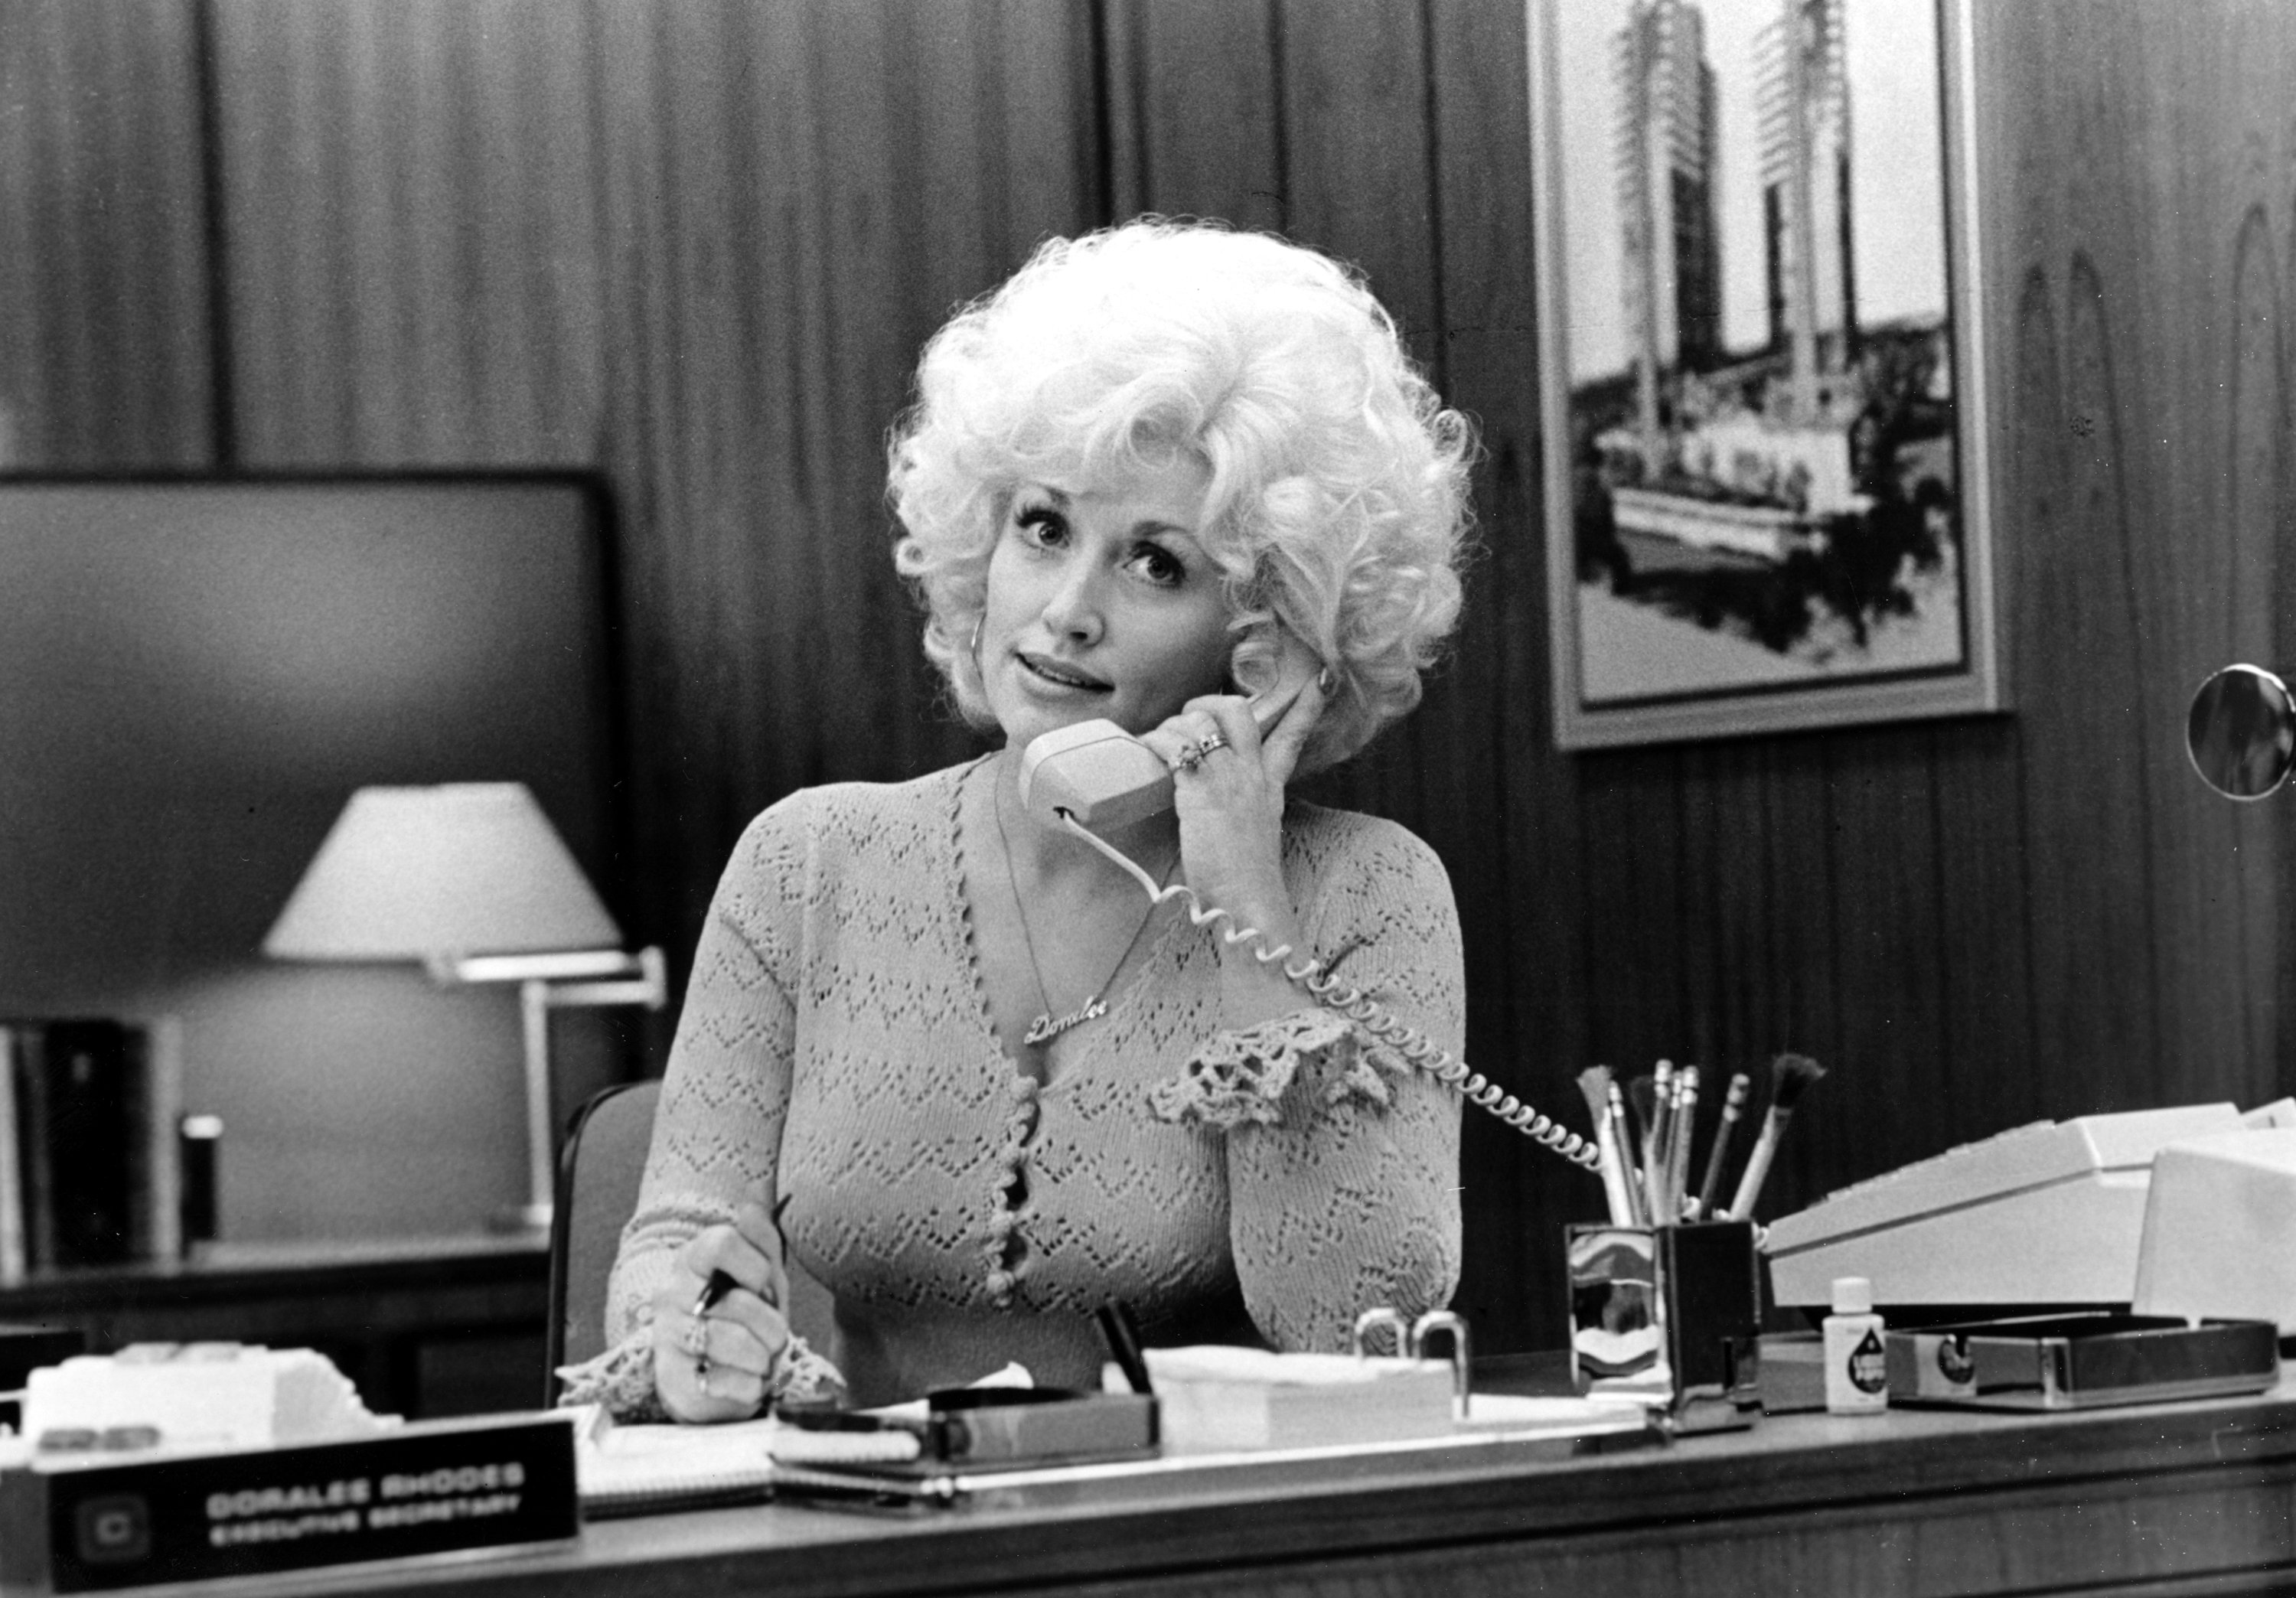 Dolly Parton on the phone